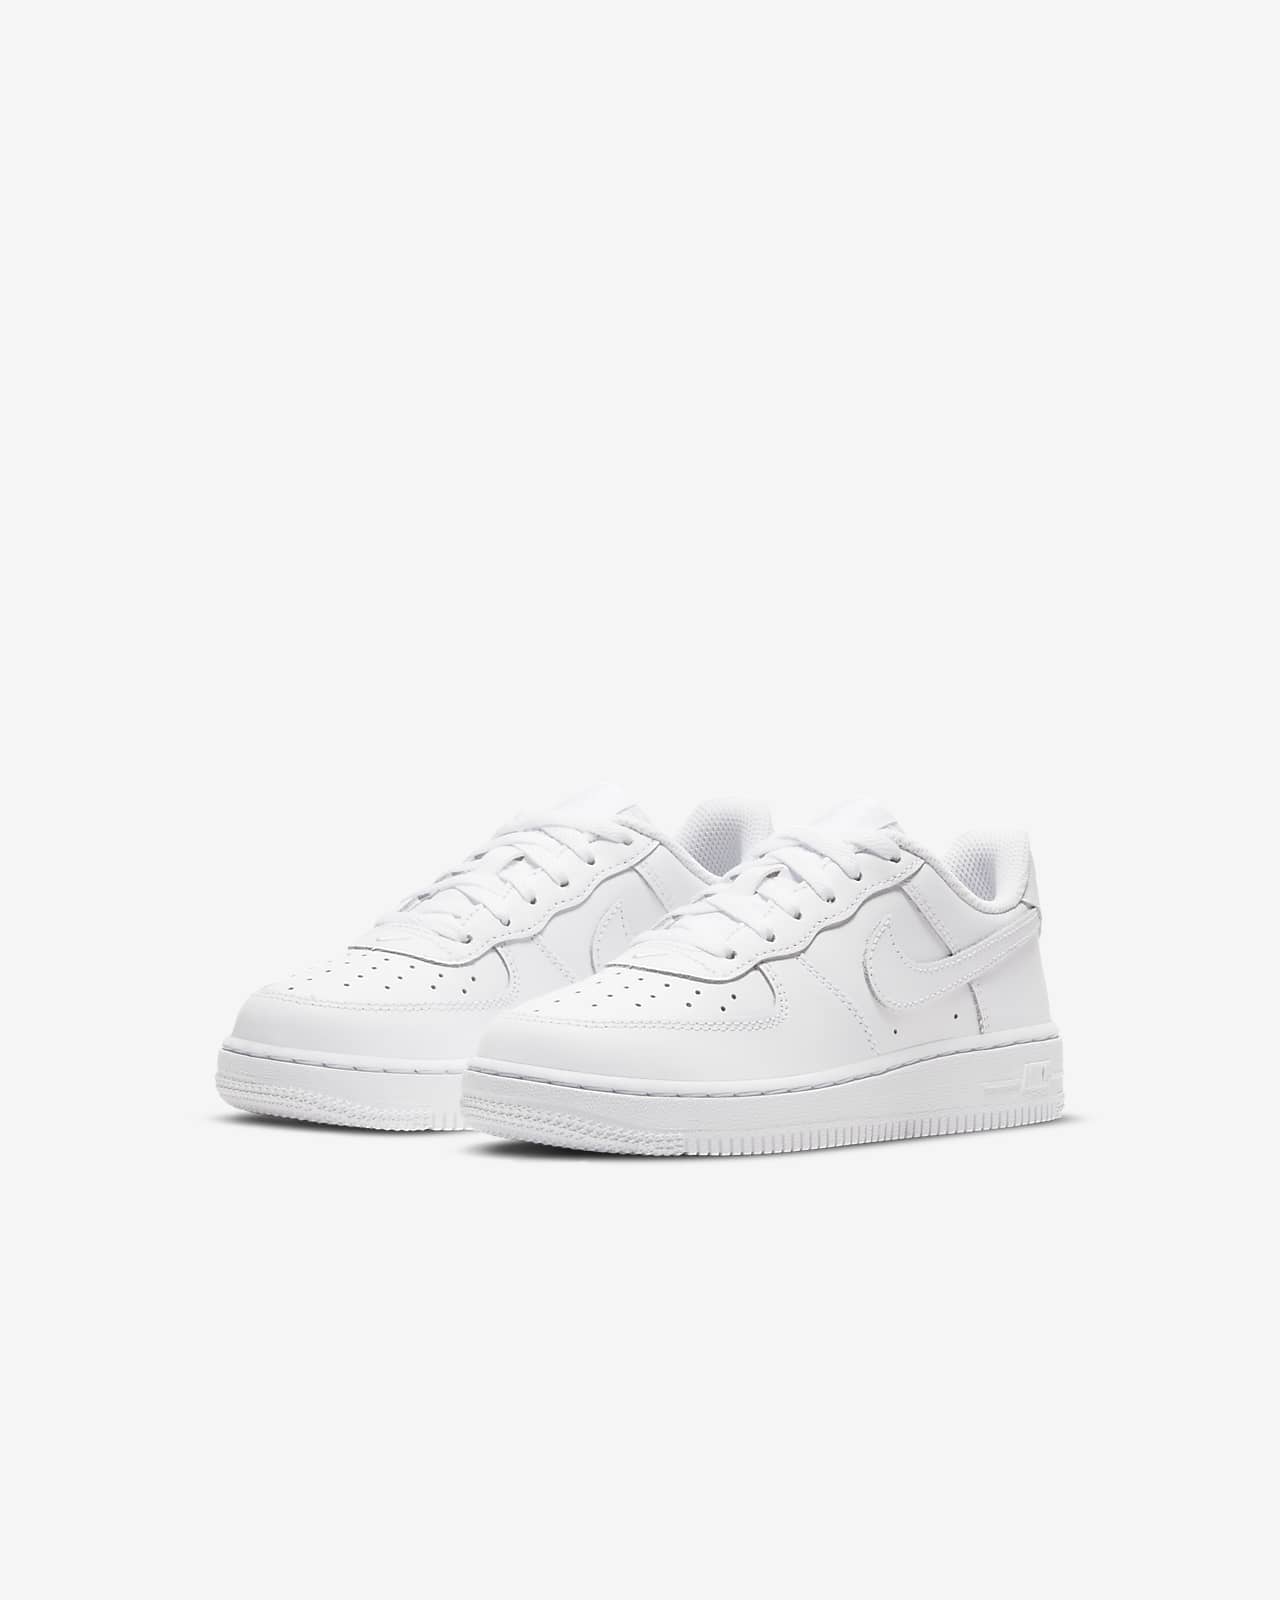 Nike Kids' Air Force 1 Shoes